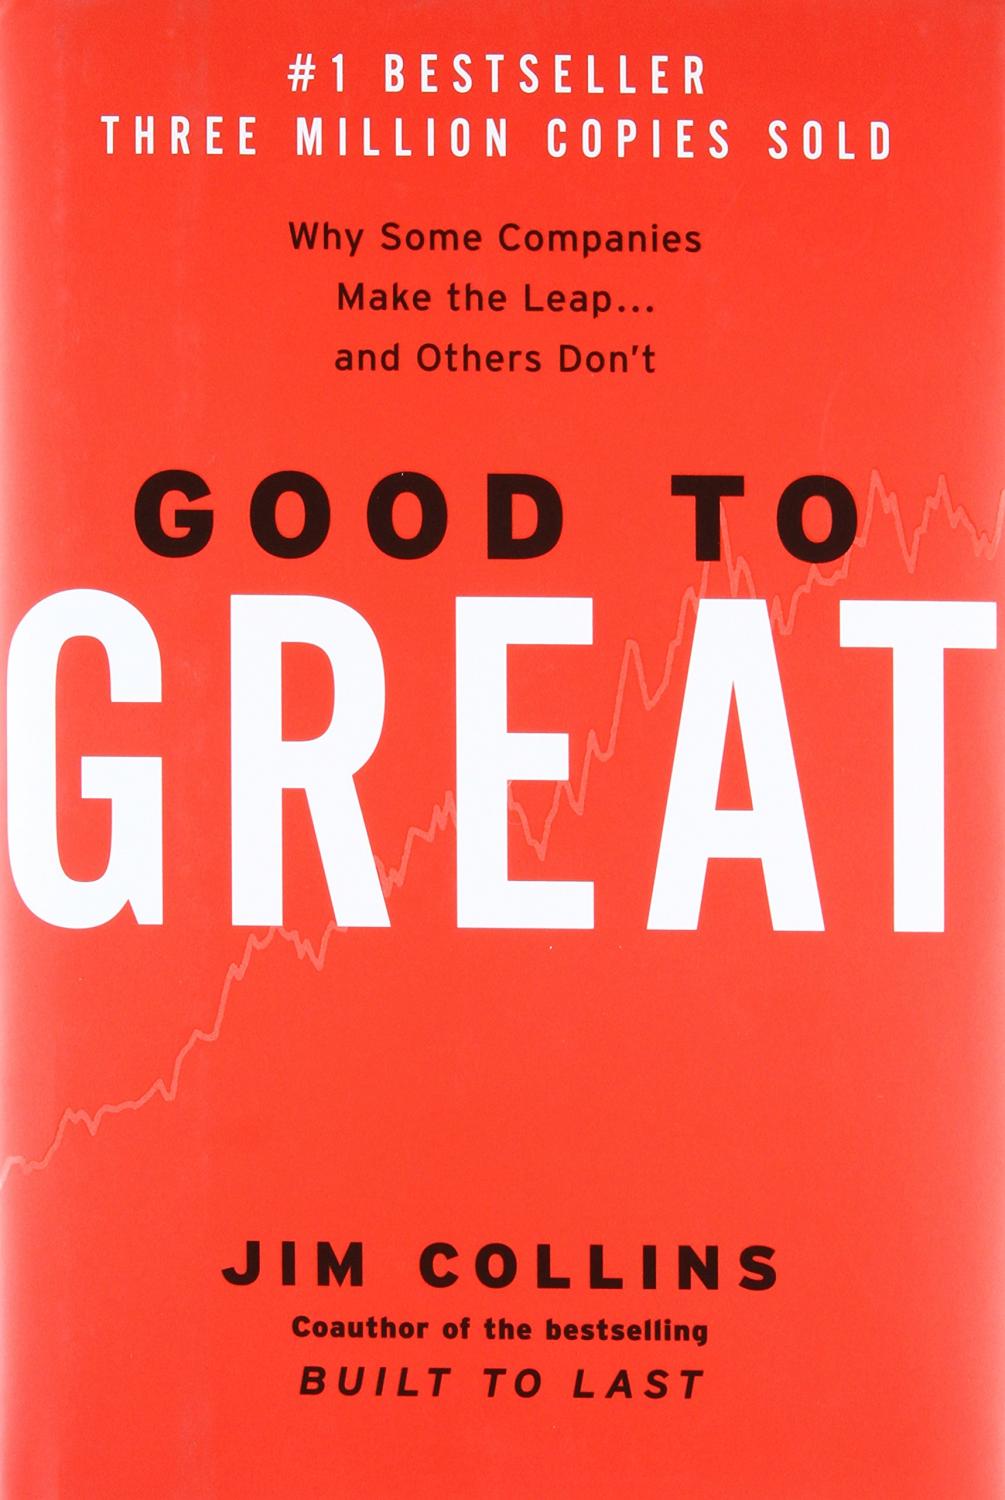 "From Good to Great"